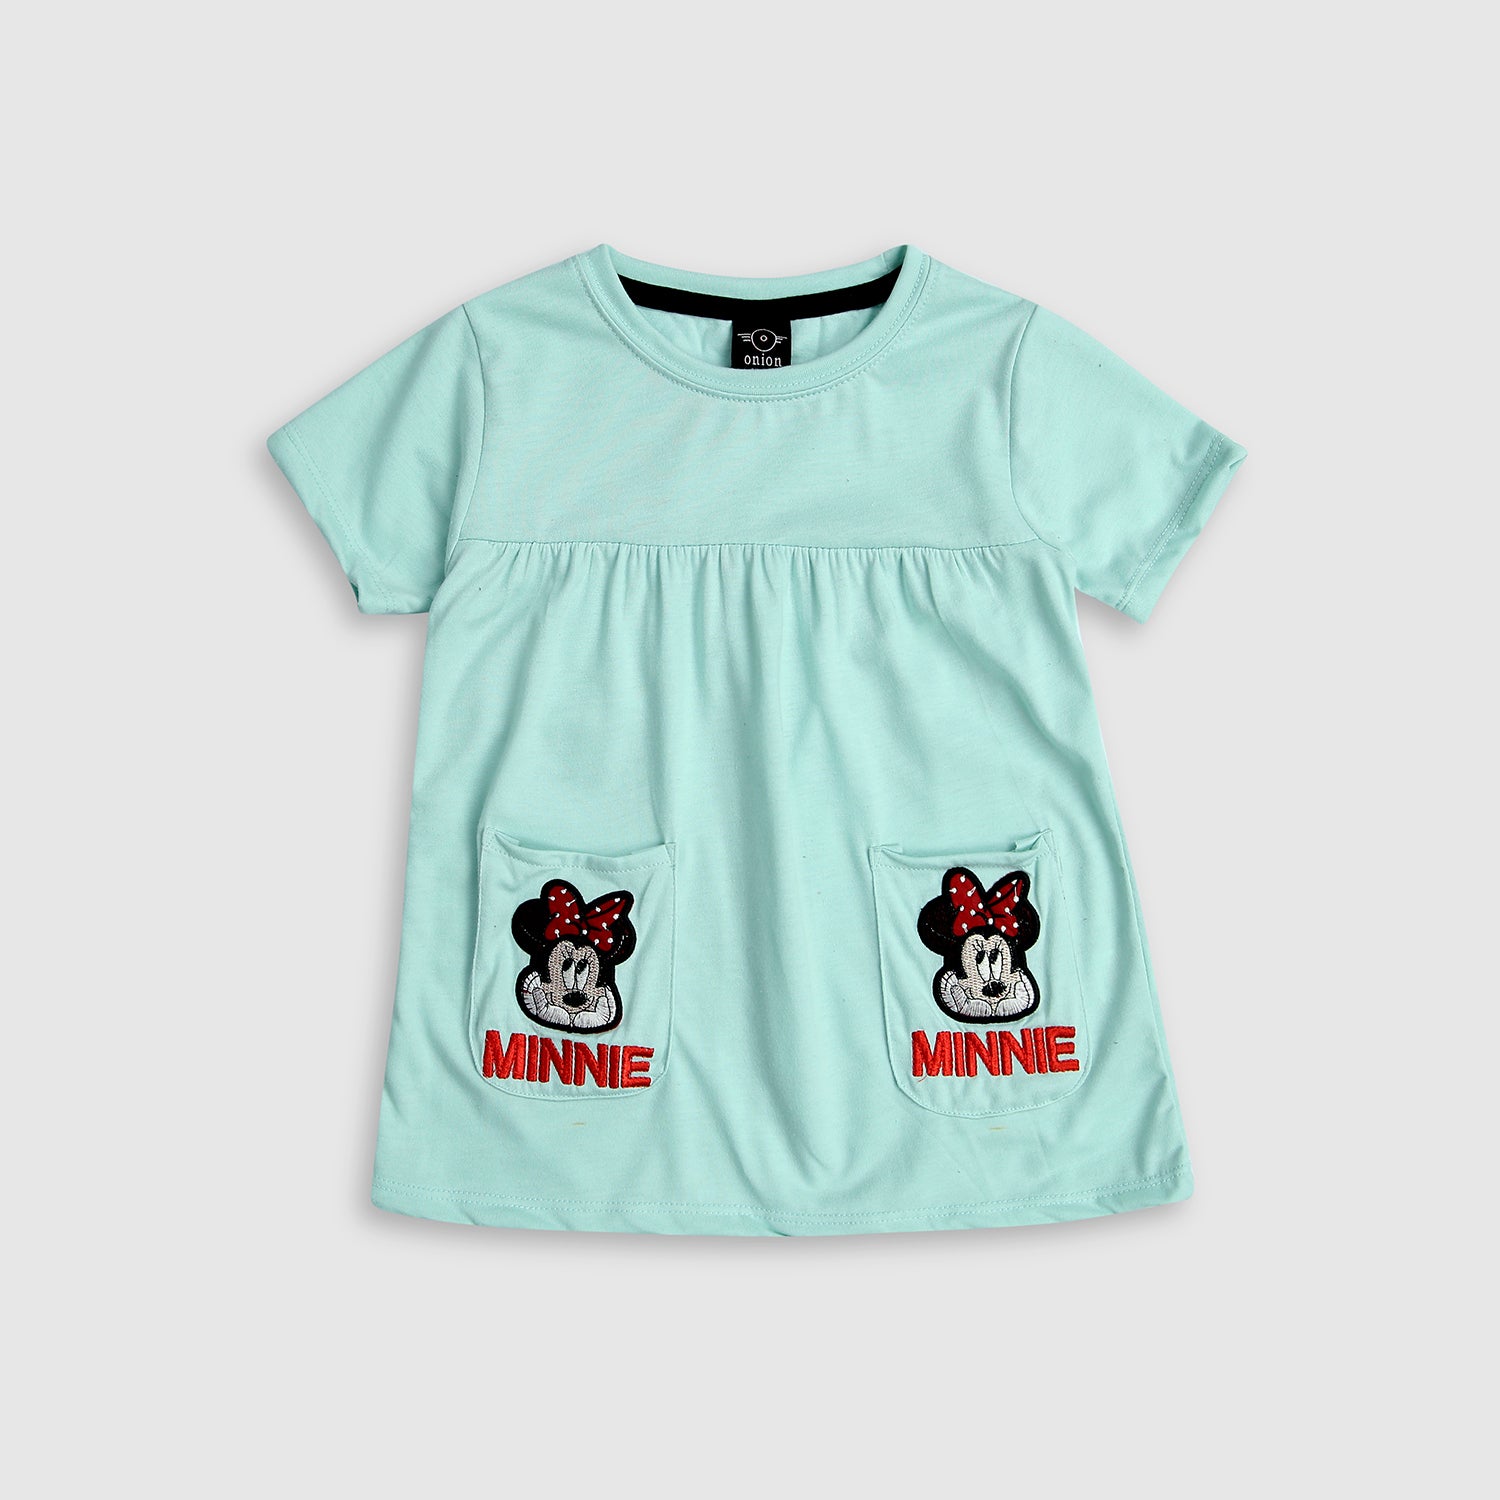 Girls Pure Cotton 2 Pocket Minnie Embroidered T-shirt Frock